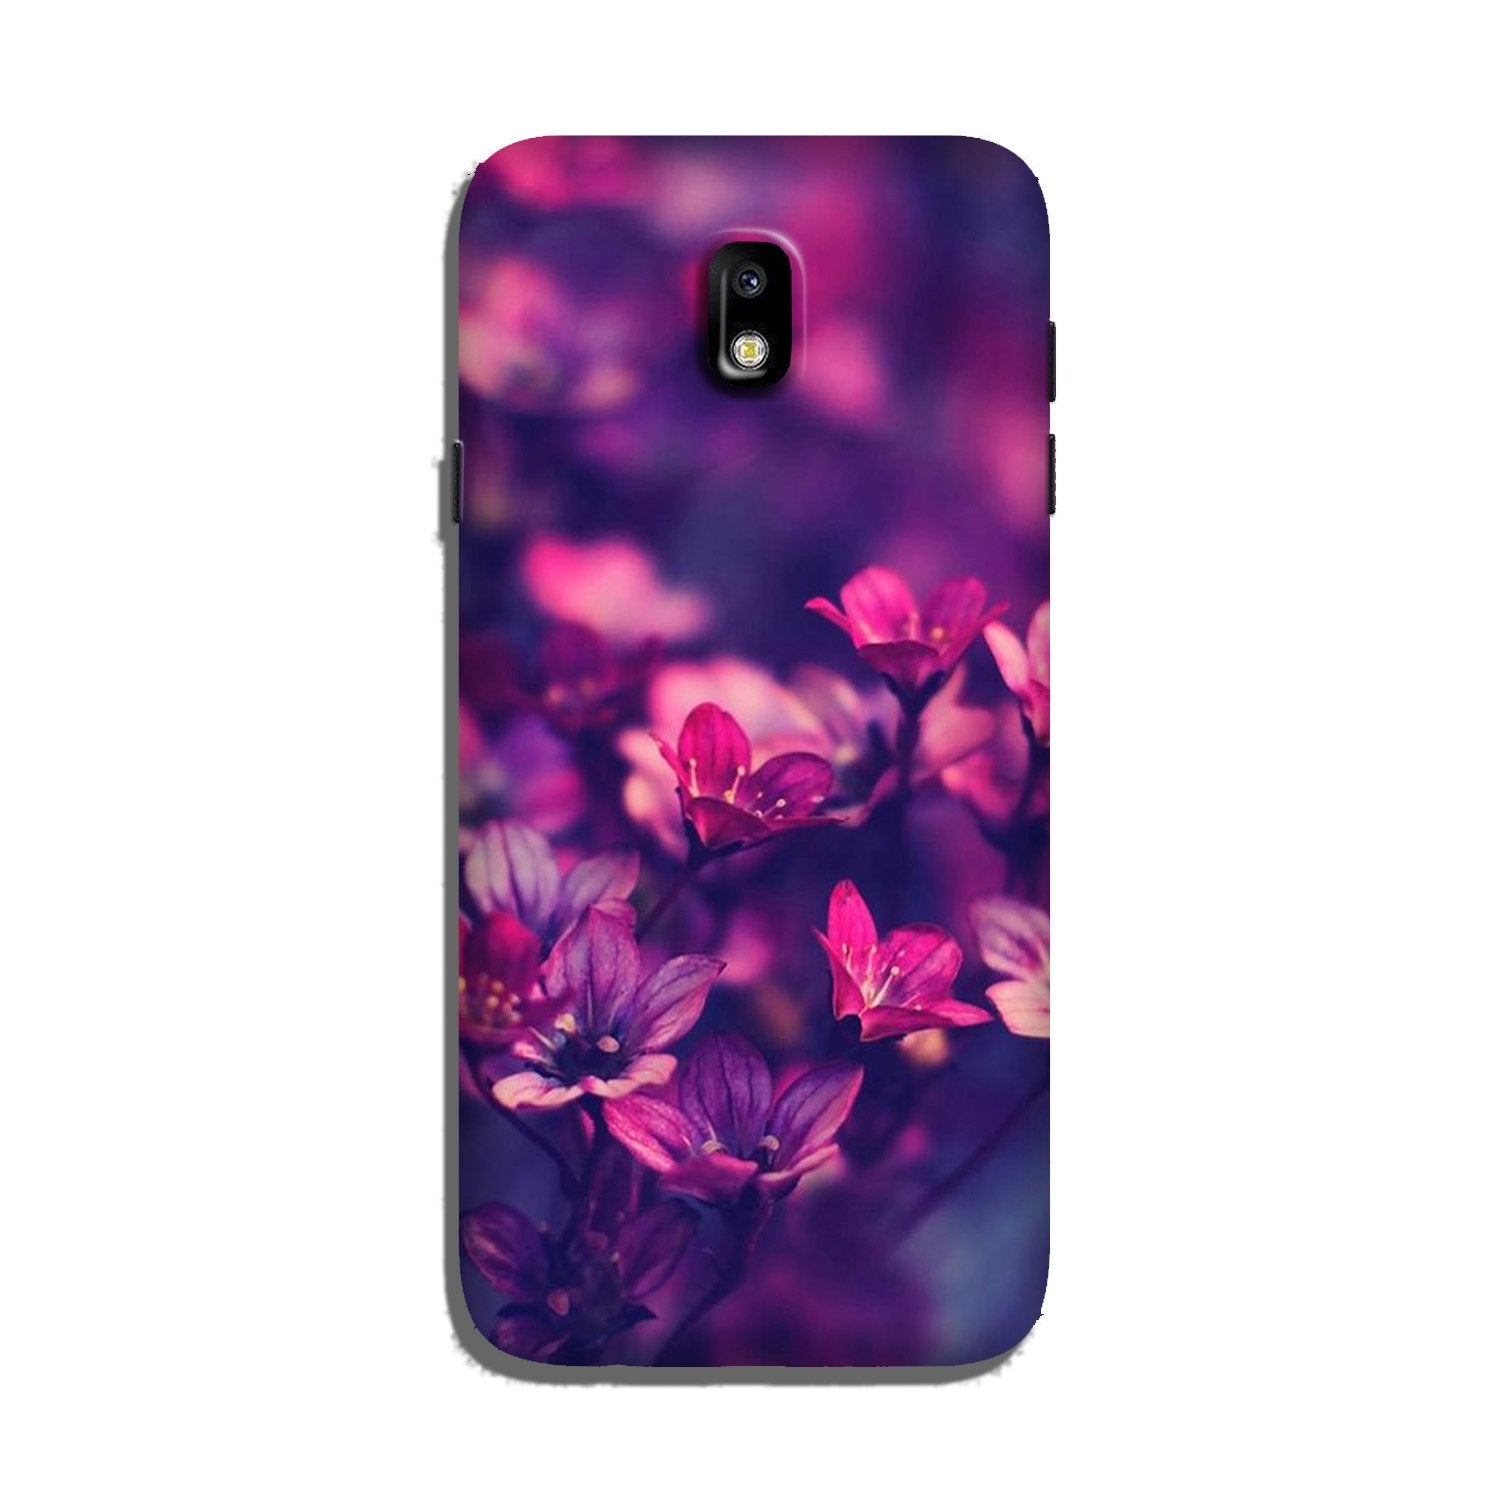 flowers Case for Galaxy J7 Pro